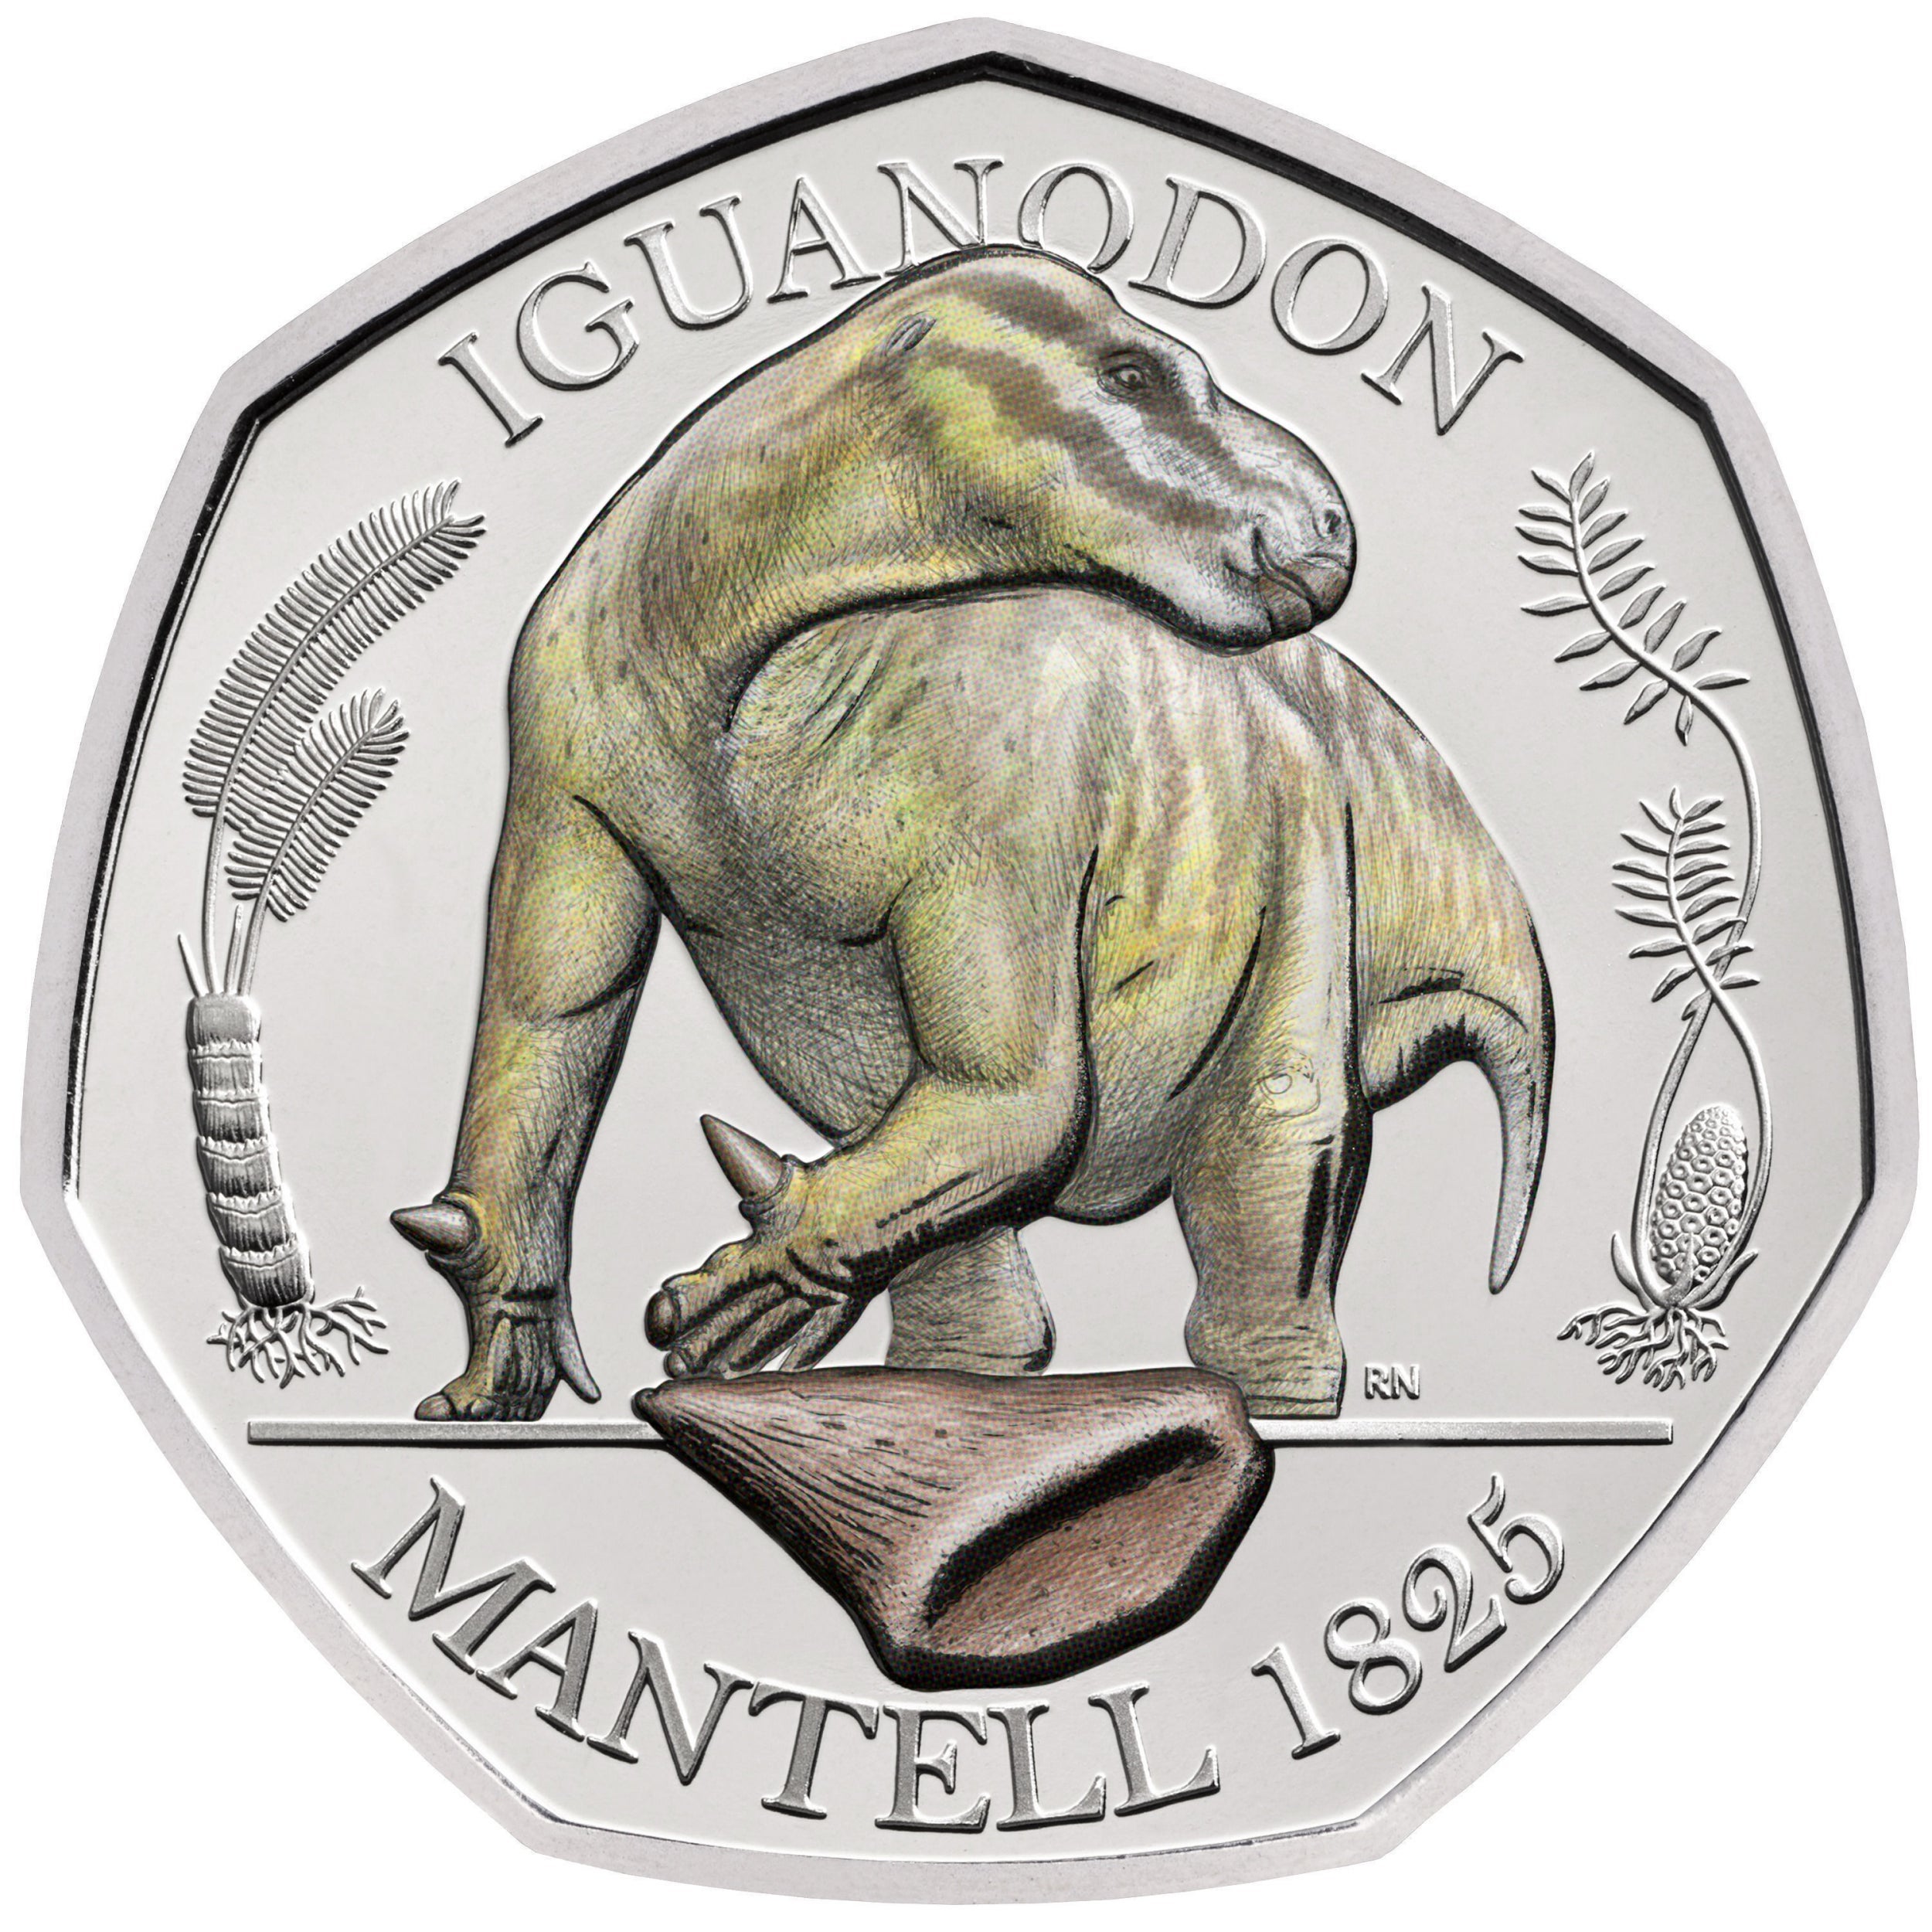 A commemorative 50 pence coin from the Royal Mint Dinosauria Collection which shows a Iguanodon